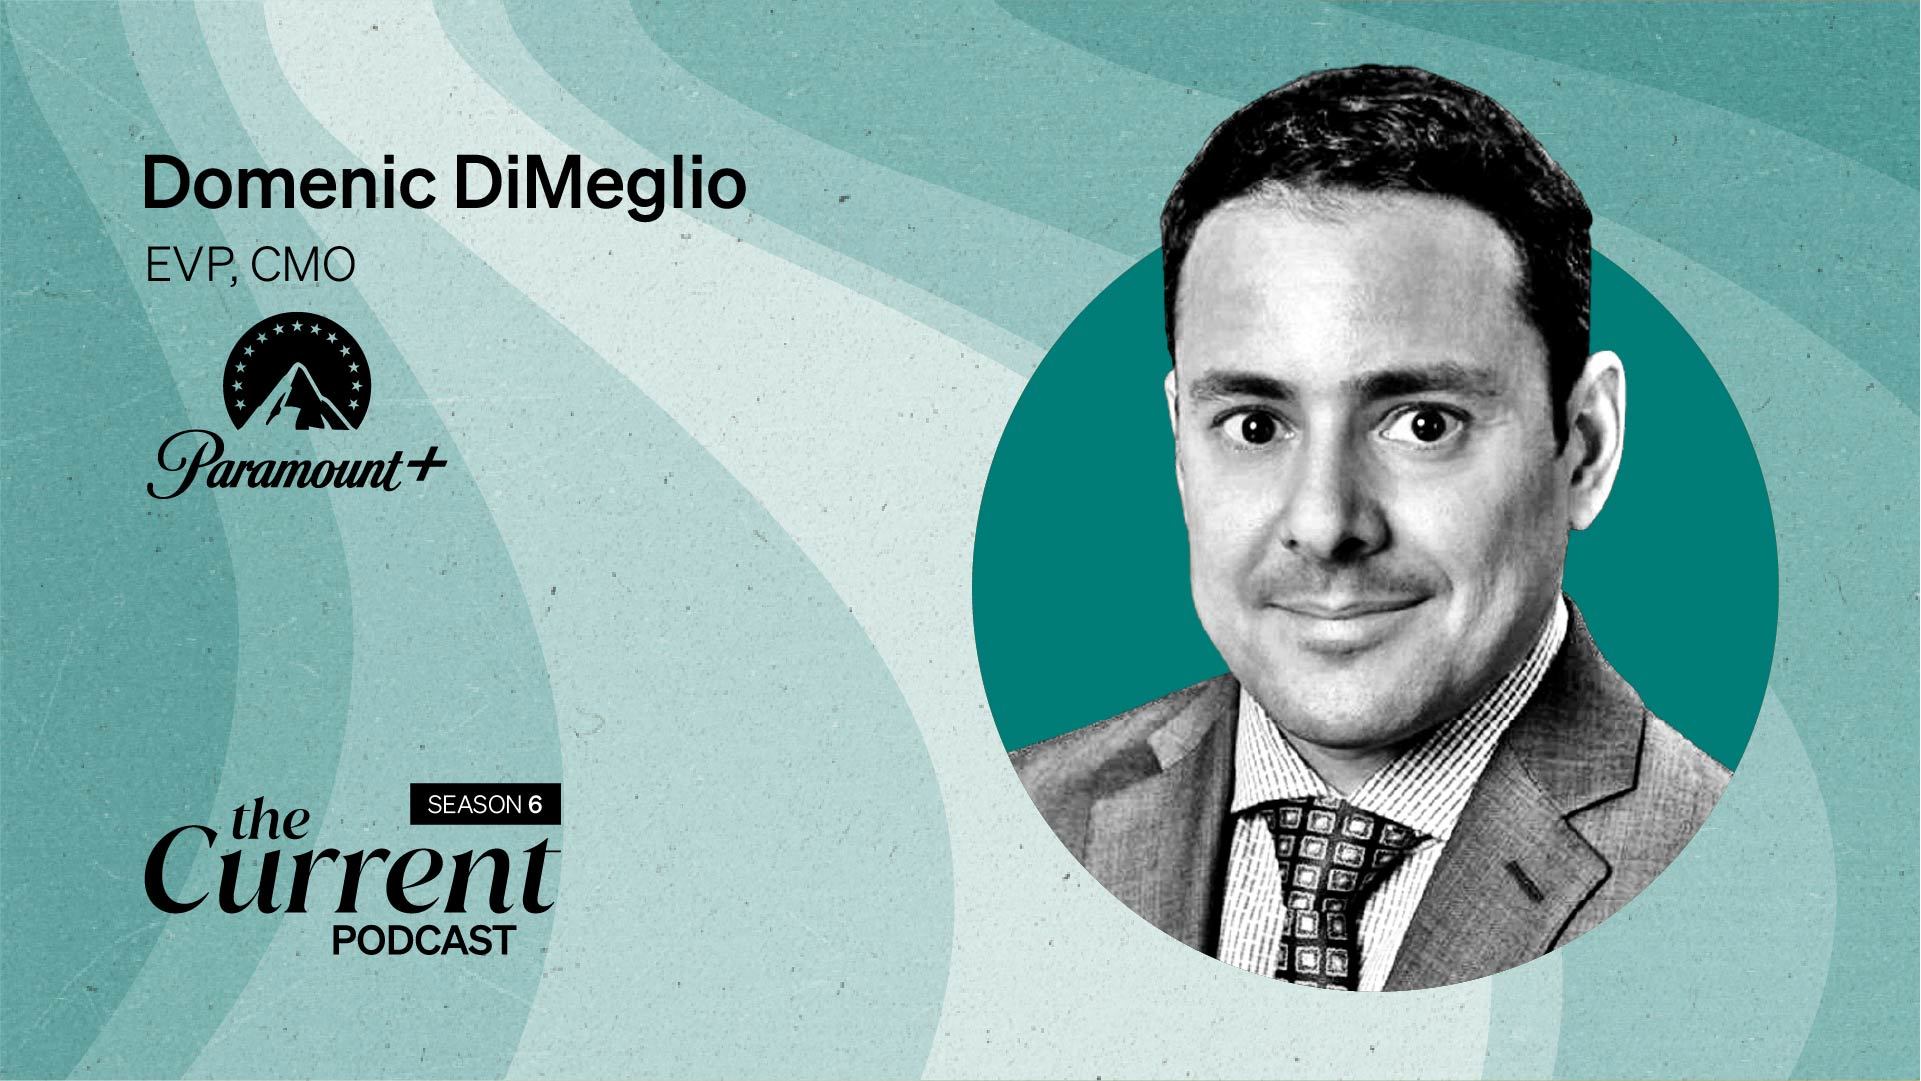 Paramount+’s Domenic DiMeglio on pioneering the FAST space | The Current